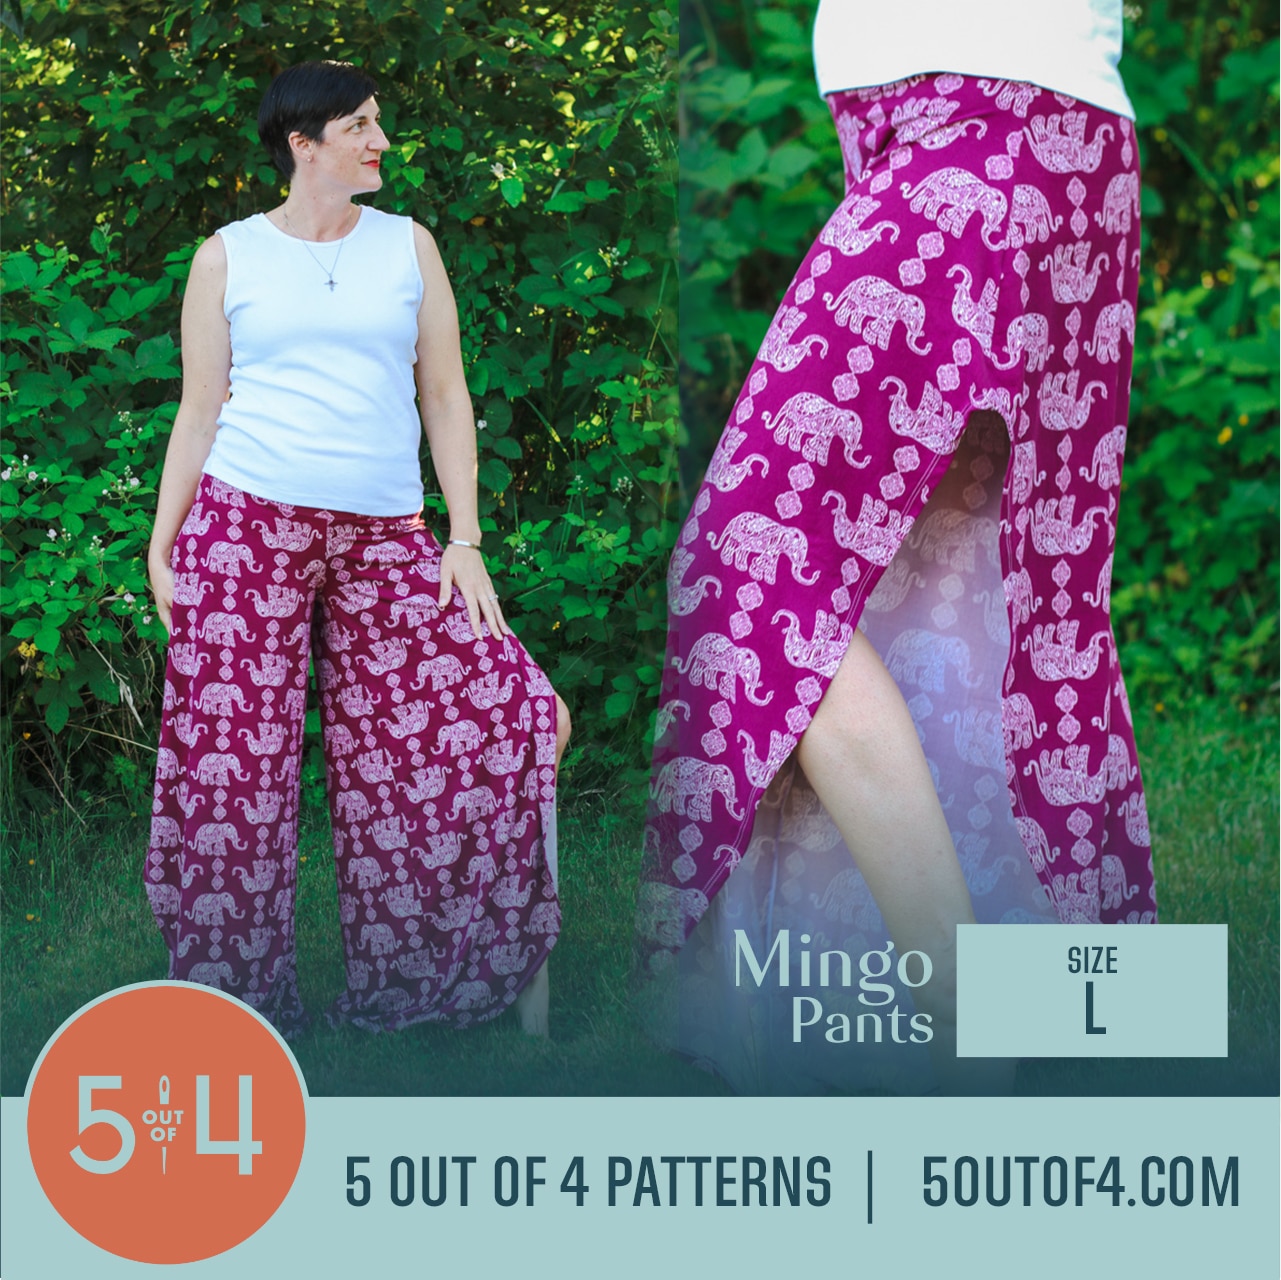 Mingo Shorts, Capris, and Pants - 5 out of 4 Patterns